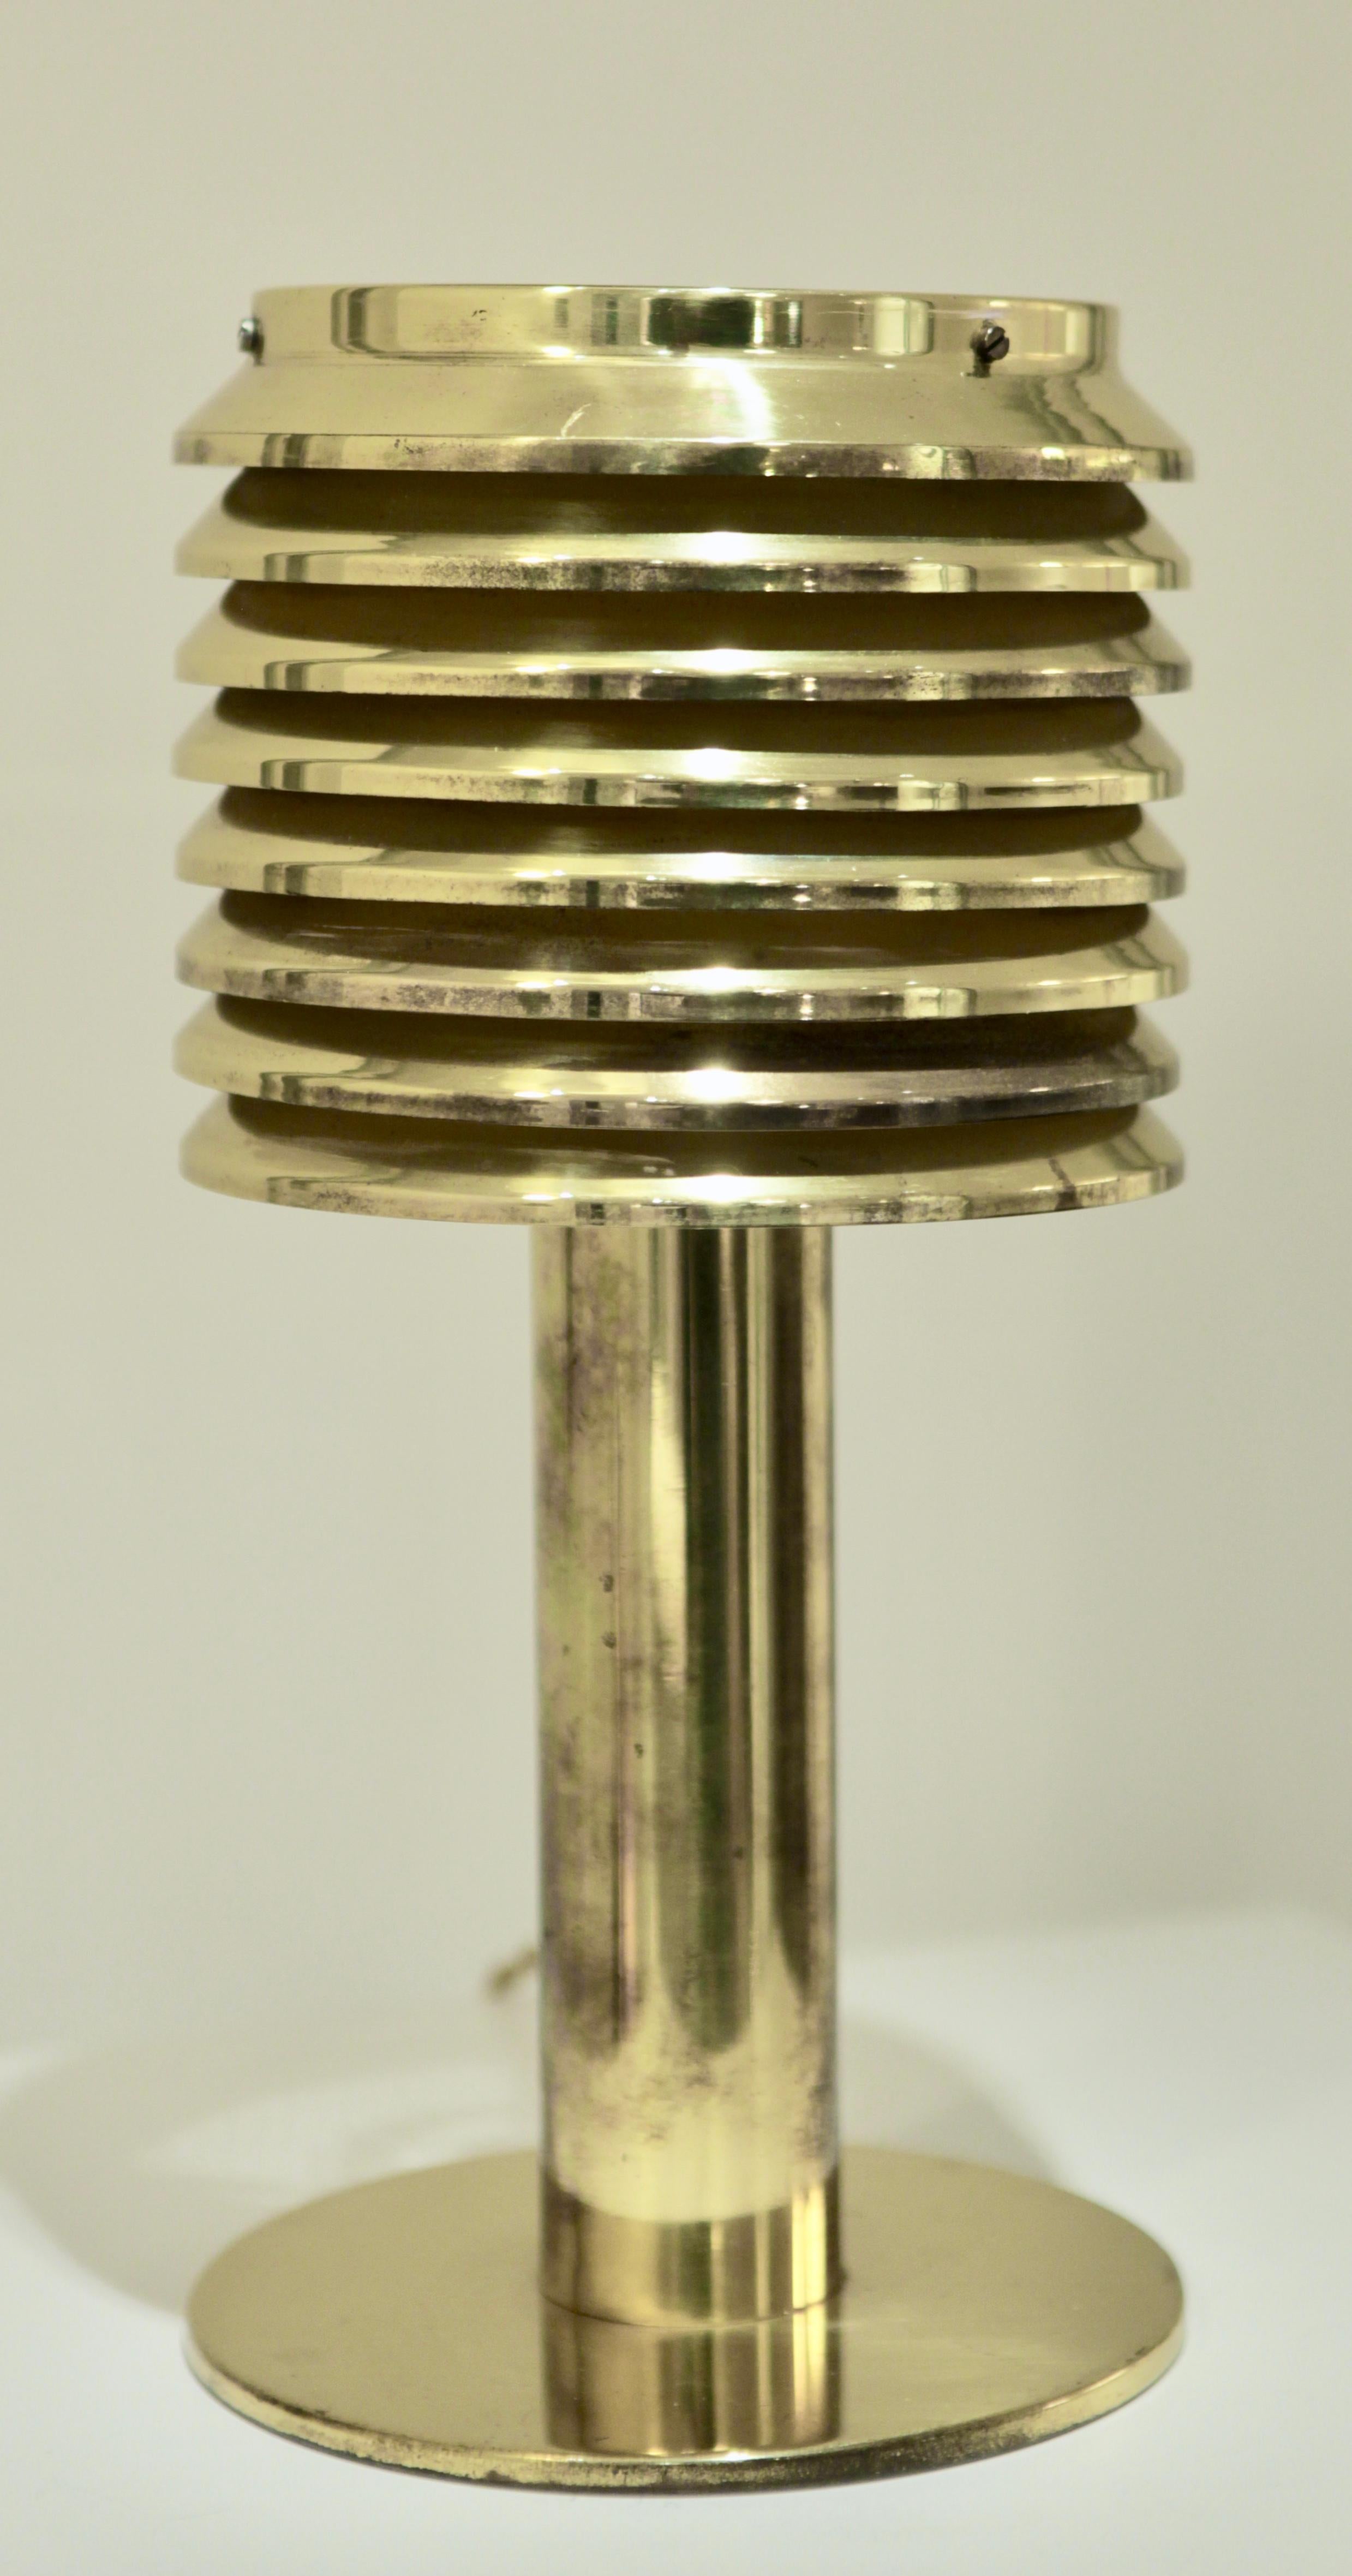 Hans-Agne Jakobsson,
Table lamp, Model B 142 in brass, 1960s
Excellent vintage condition,
Rewired.